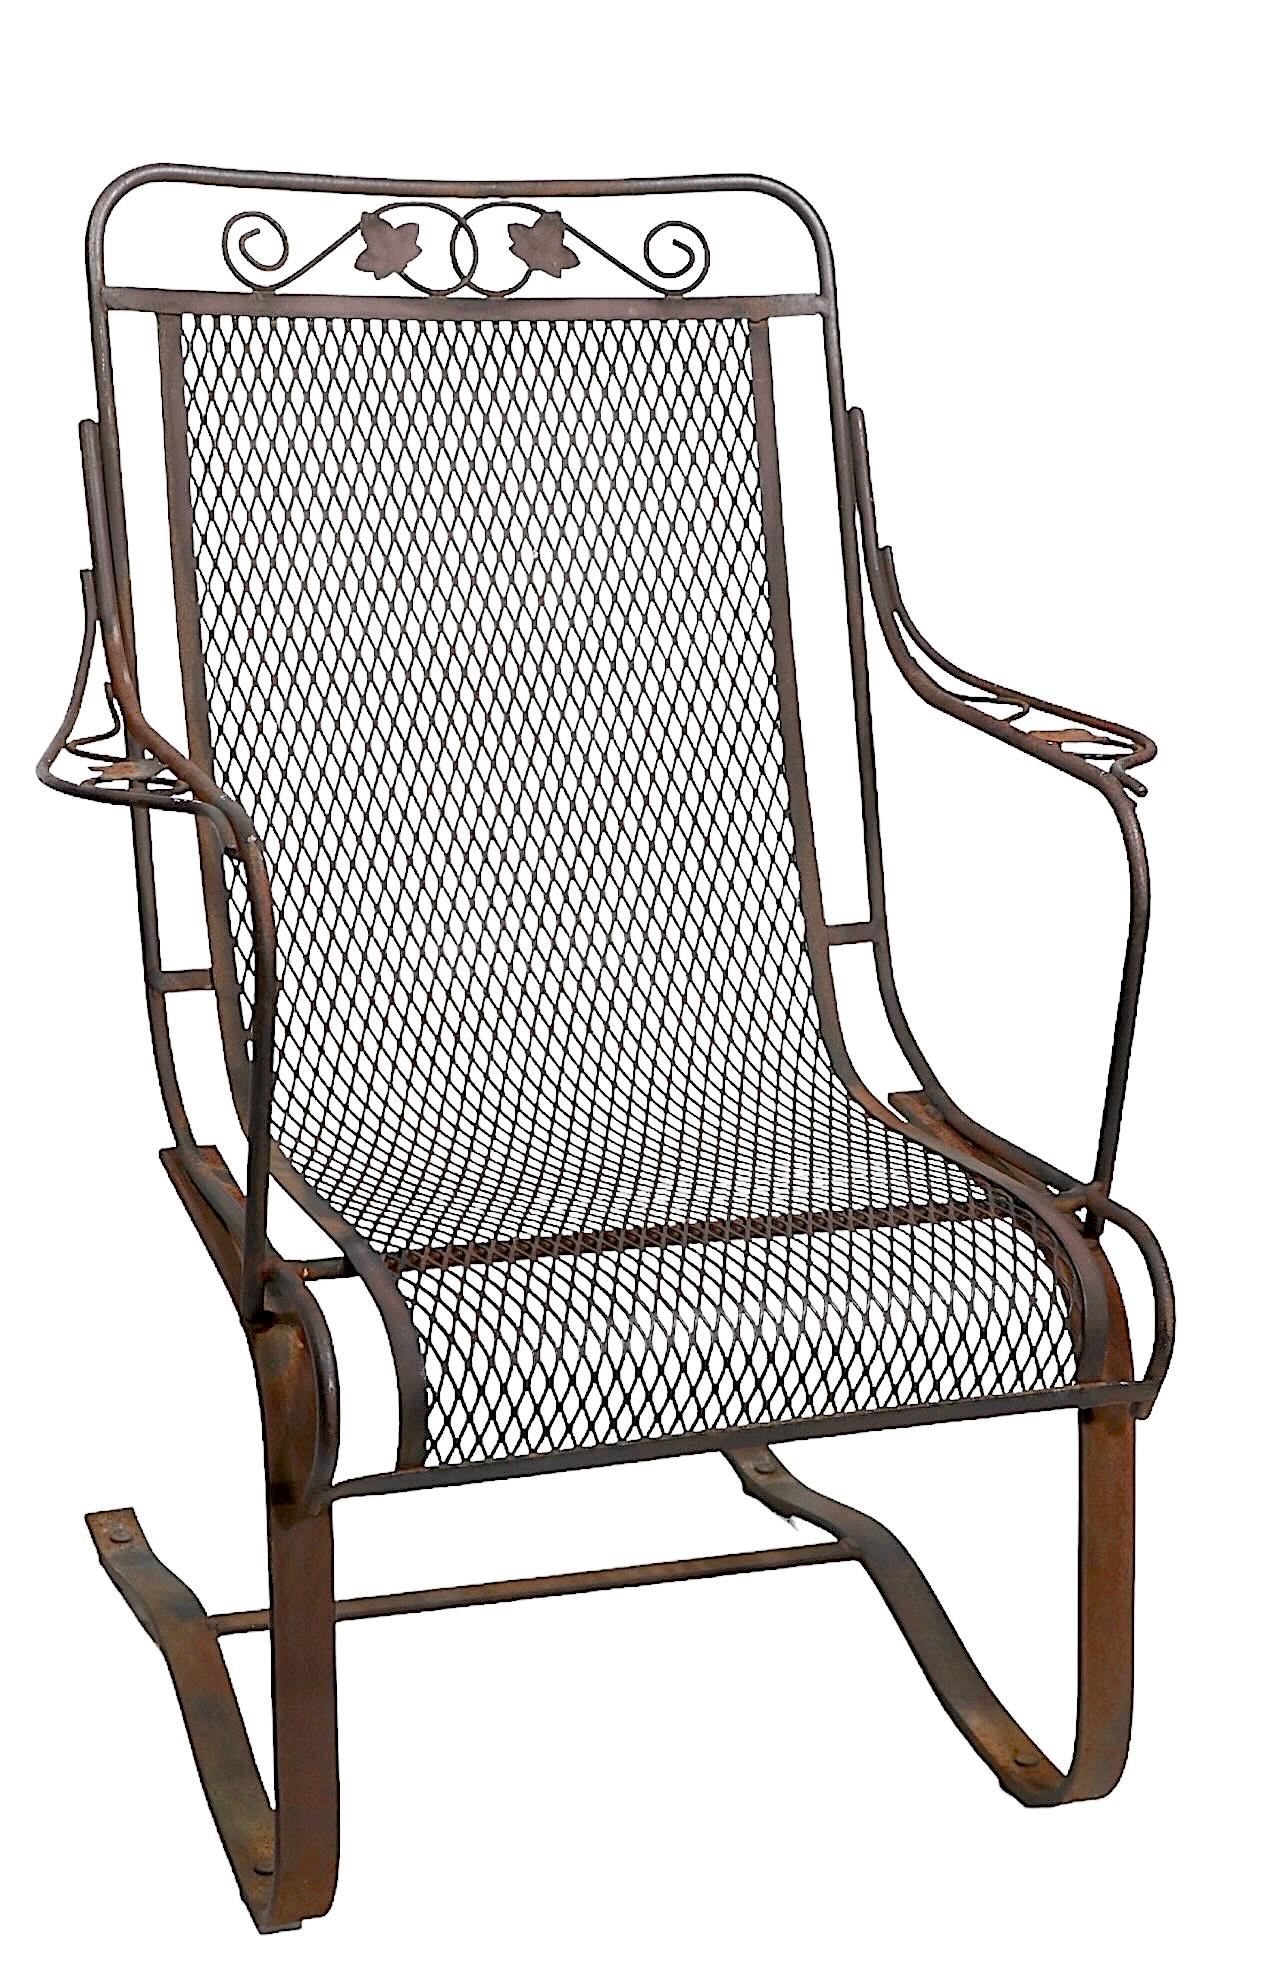 Hollywood Regency Wrought Iron Cantilevered High Back Lounge Garden Patio Poolside Chair 